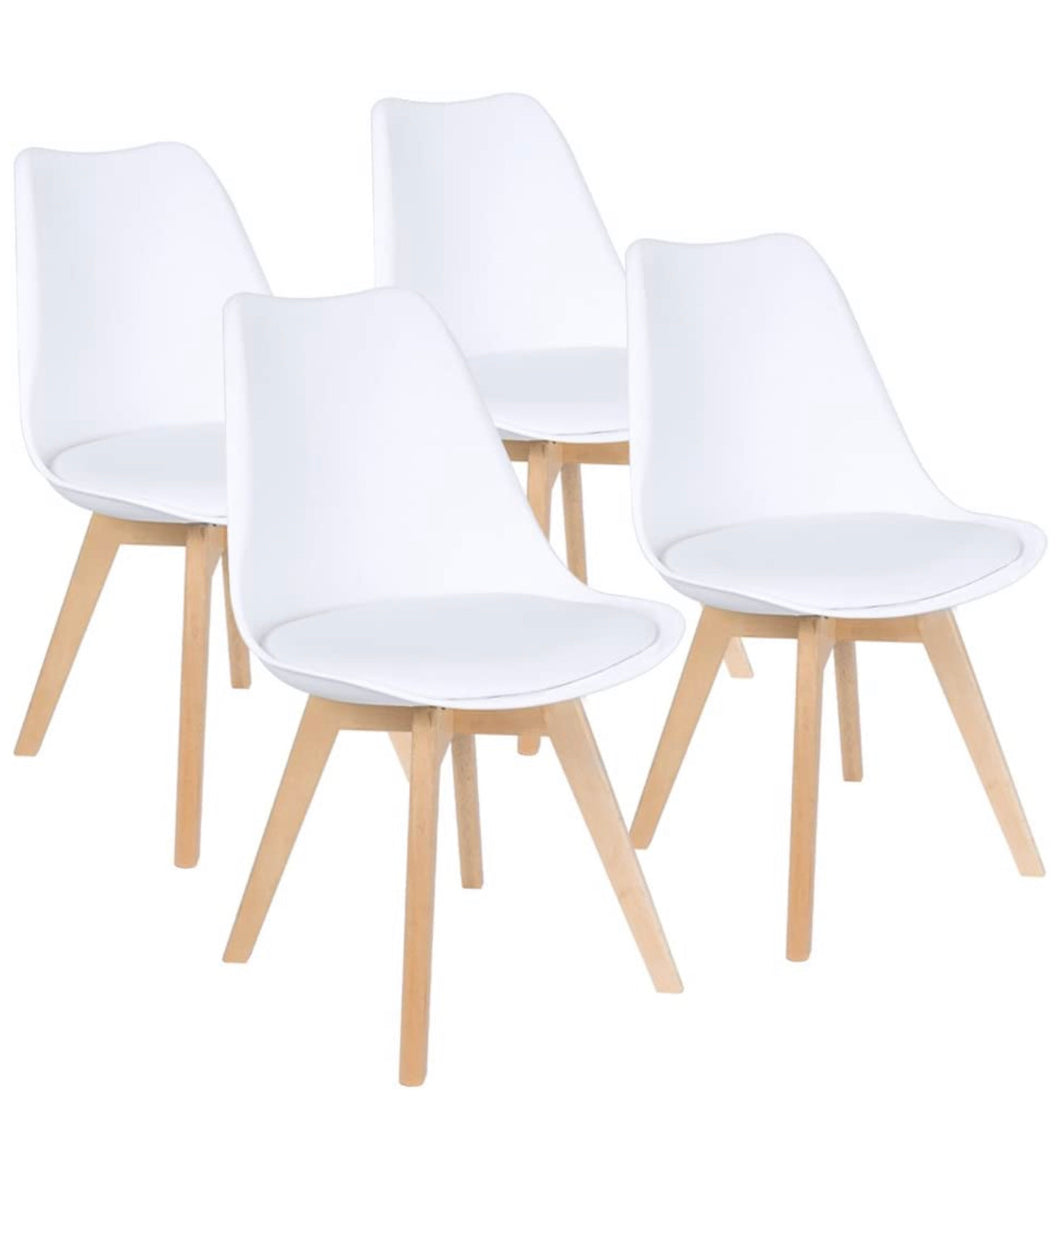 Set of 4, Mid Century Modern Dining Chair with Beech Wood Legs and Soft Padded Shell, White